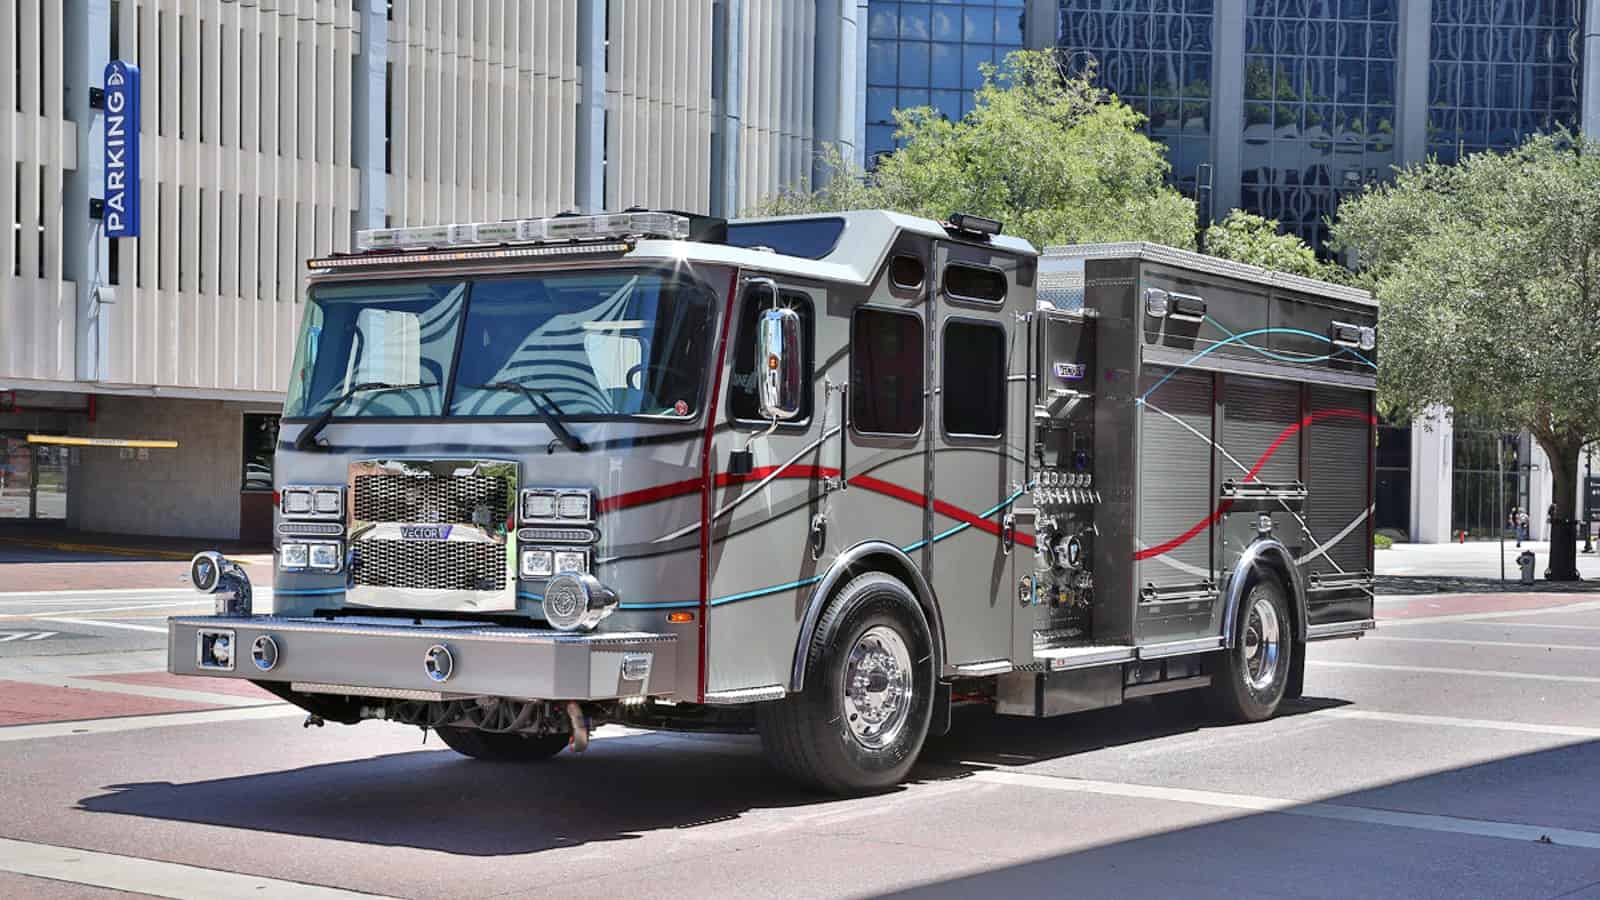 Fire departments in Toronto, Greater Montreal embrace electric trucks for safety and performance